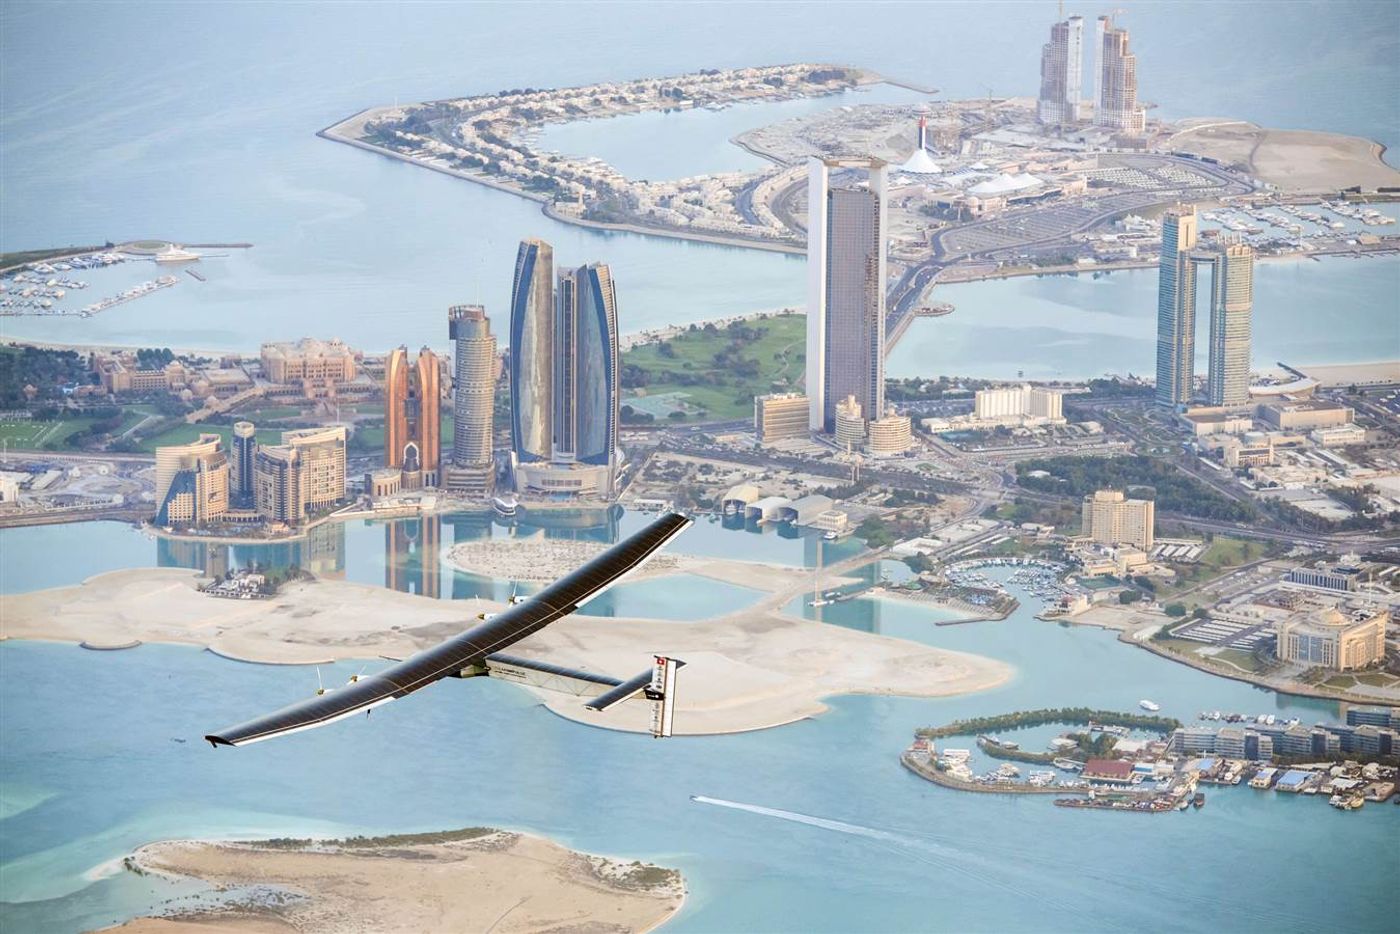 The Solar Impulse 2 flies over Abu Dhabi on a test flight on Feb. 26. The solar-powered plane has a wingspan of 236 feet, larger than that of a Boeing 747, but weighs only 4600 pounds, about as much as a family car. More than 17,000 solar cells on the wing power lithium-ion batteries in four electric motors. The airframe makes use of carbon fiber, which is three times lighter than paper, to keep the plane as light as possible.